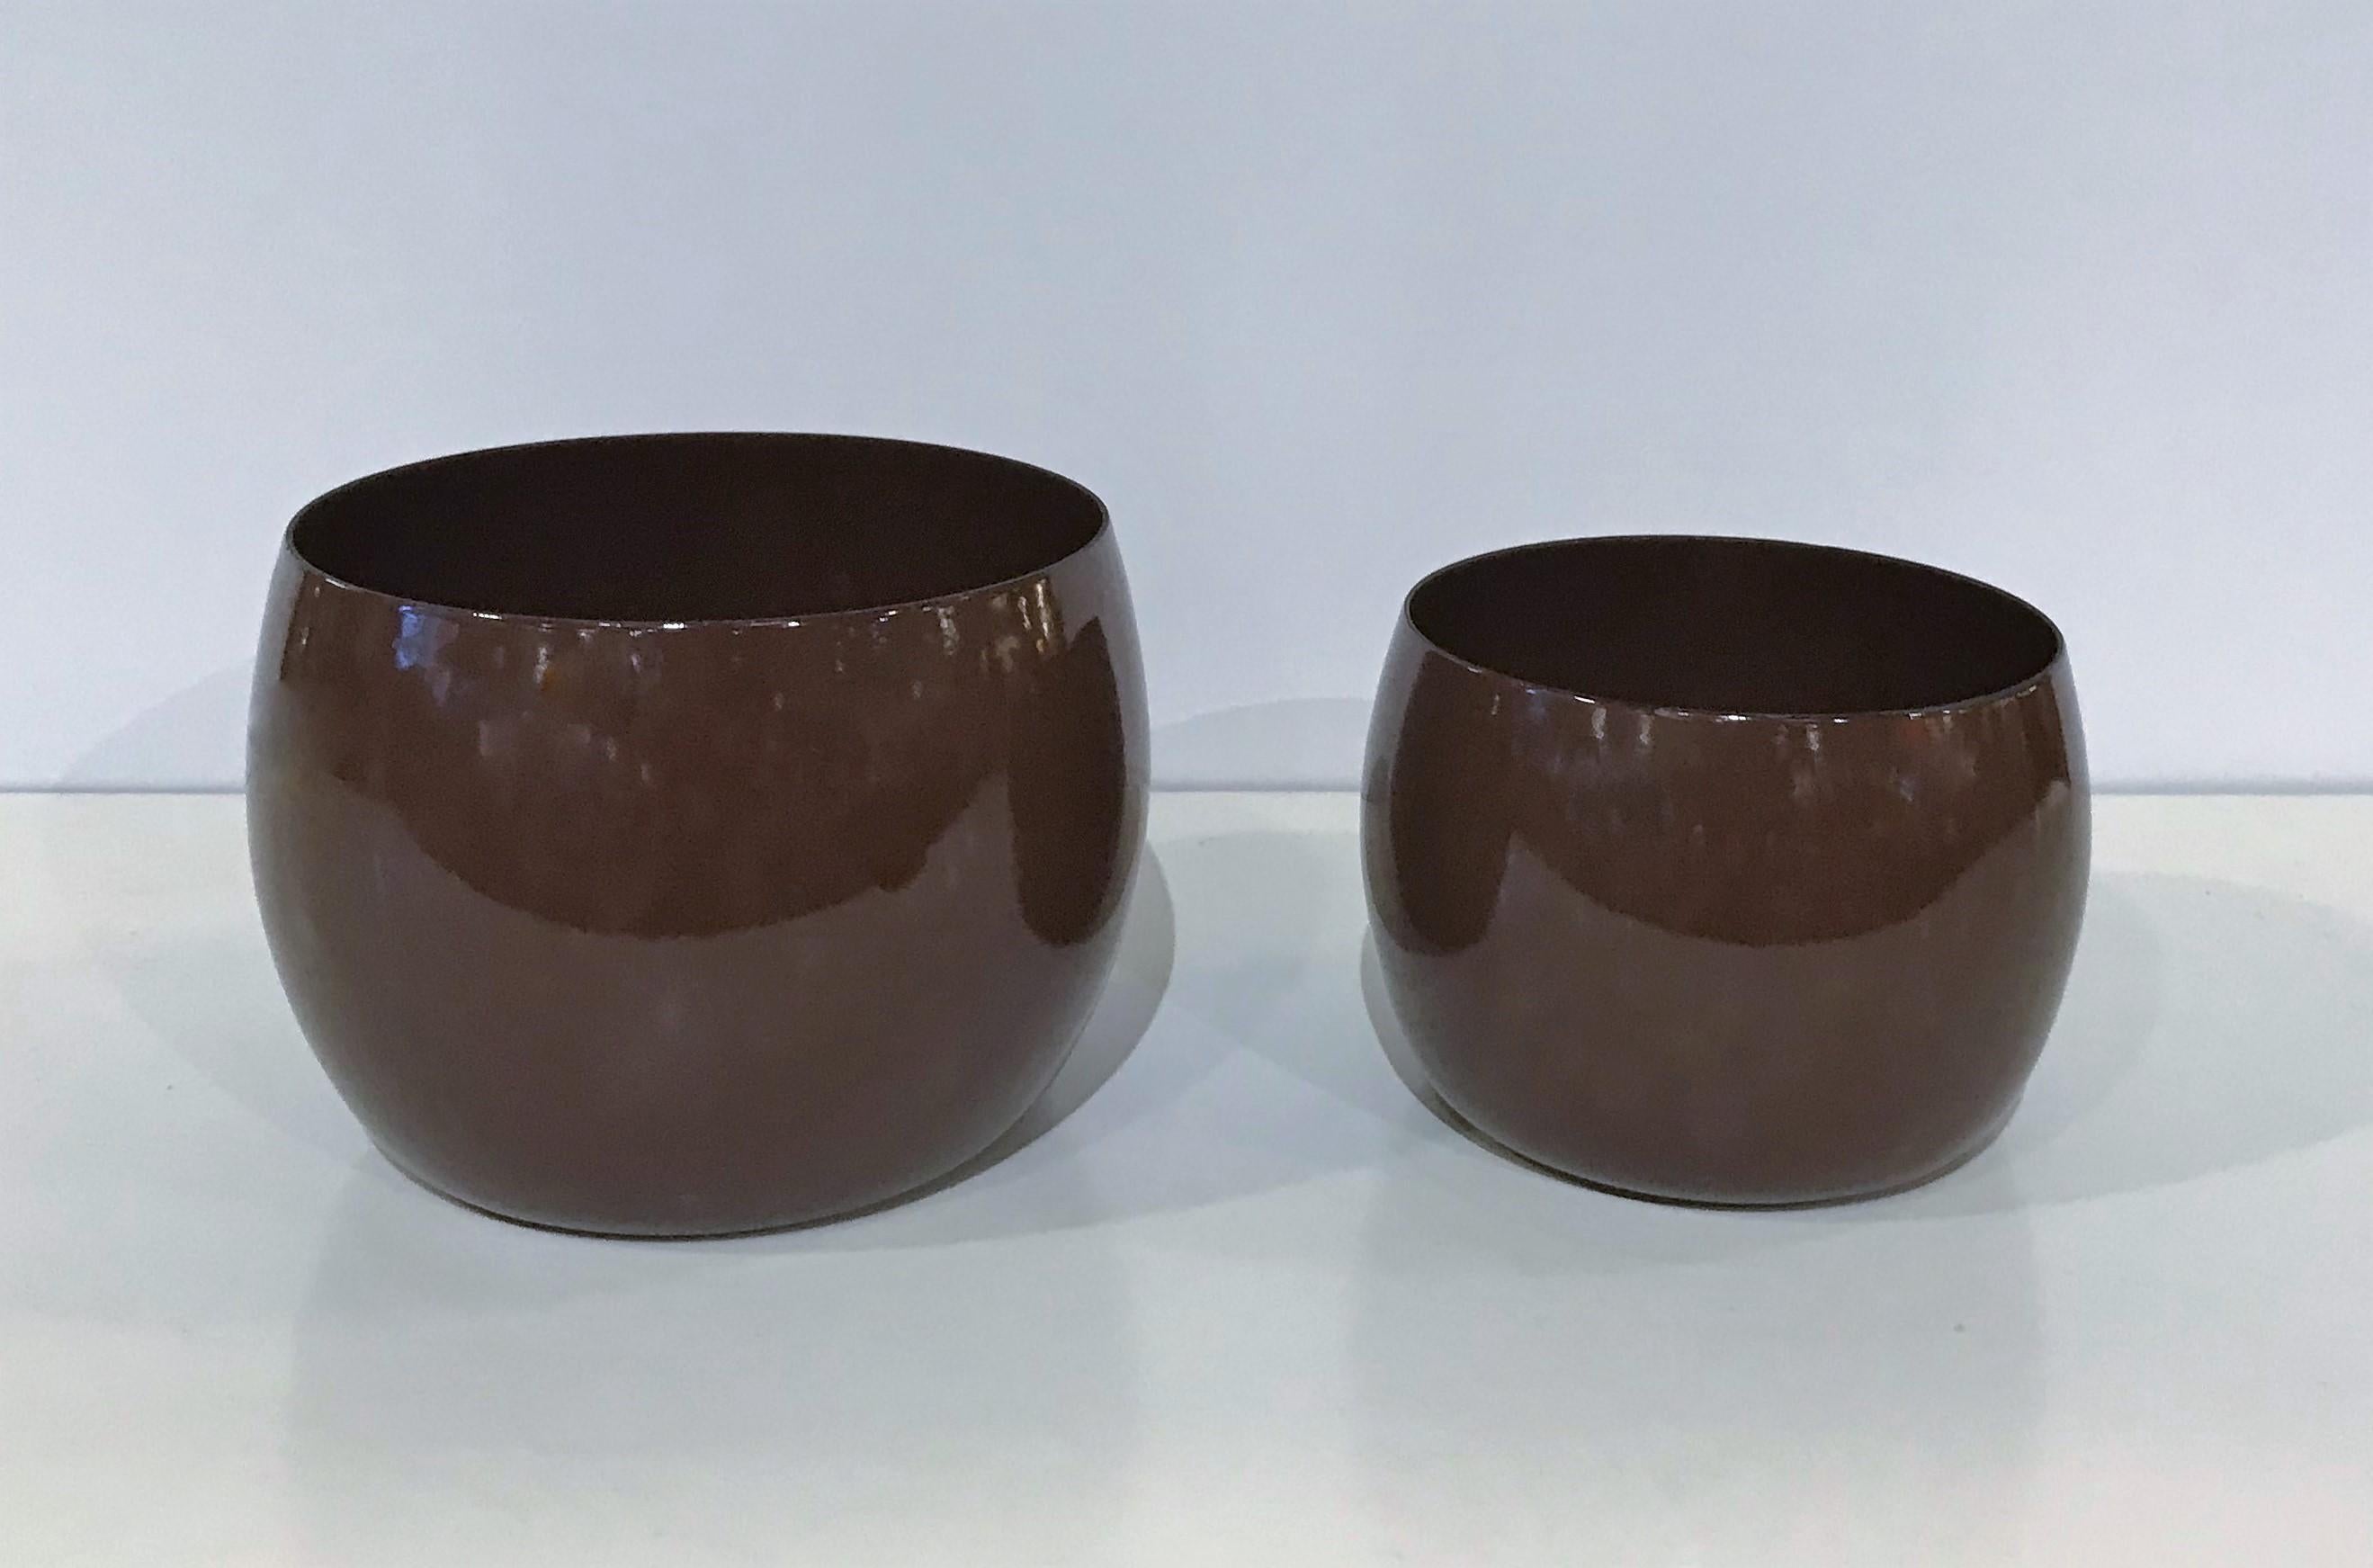 Jens Quistgaard for Dansk Designs Mid-Century Modern pair of enameled Koben style bowls.  Barrel shaped with brown enamel over iron bowls from the early 1970s.  Koben Style pieces were developed by Quistgaard for Dansk in 1958 and were originally